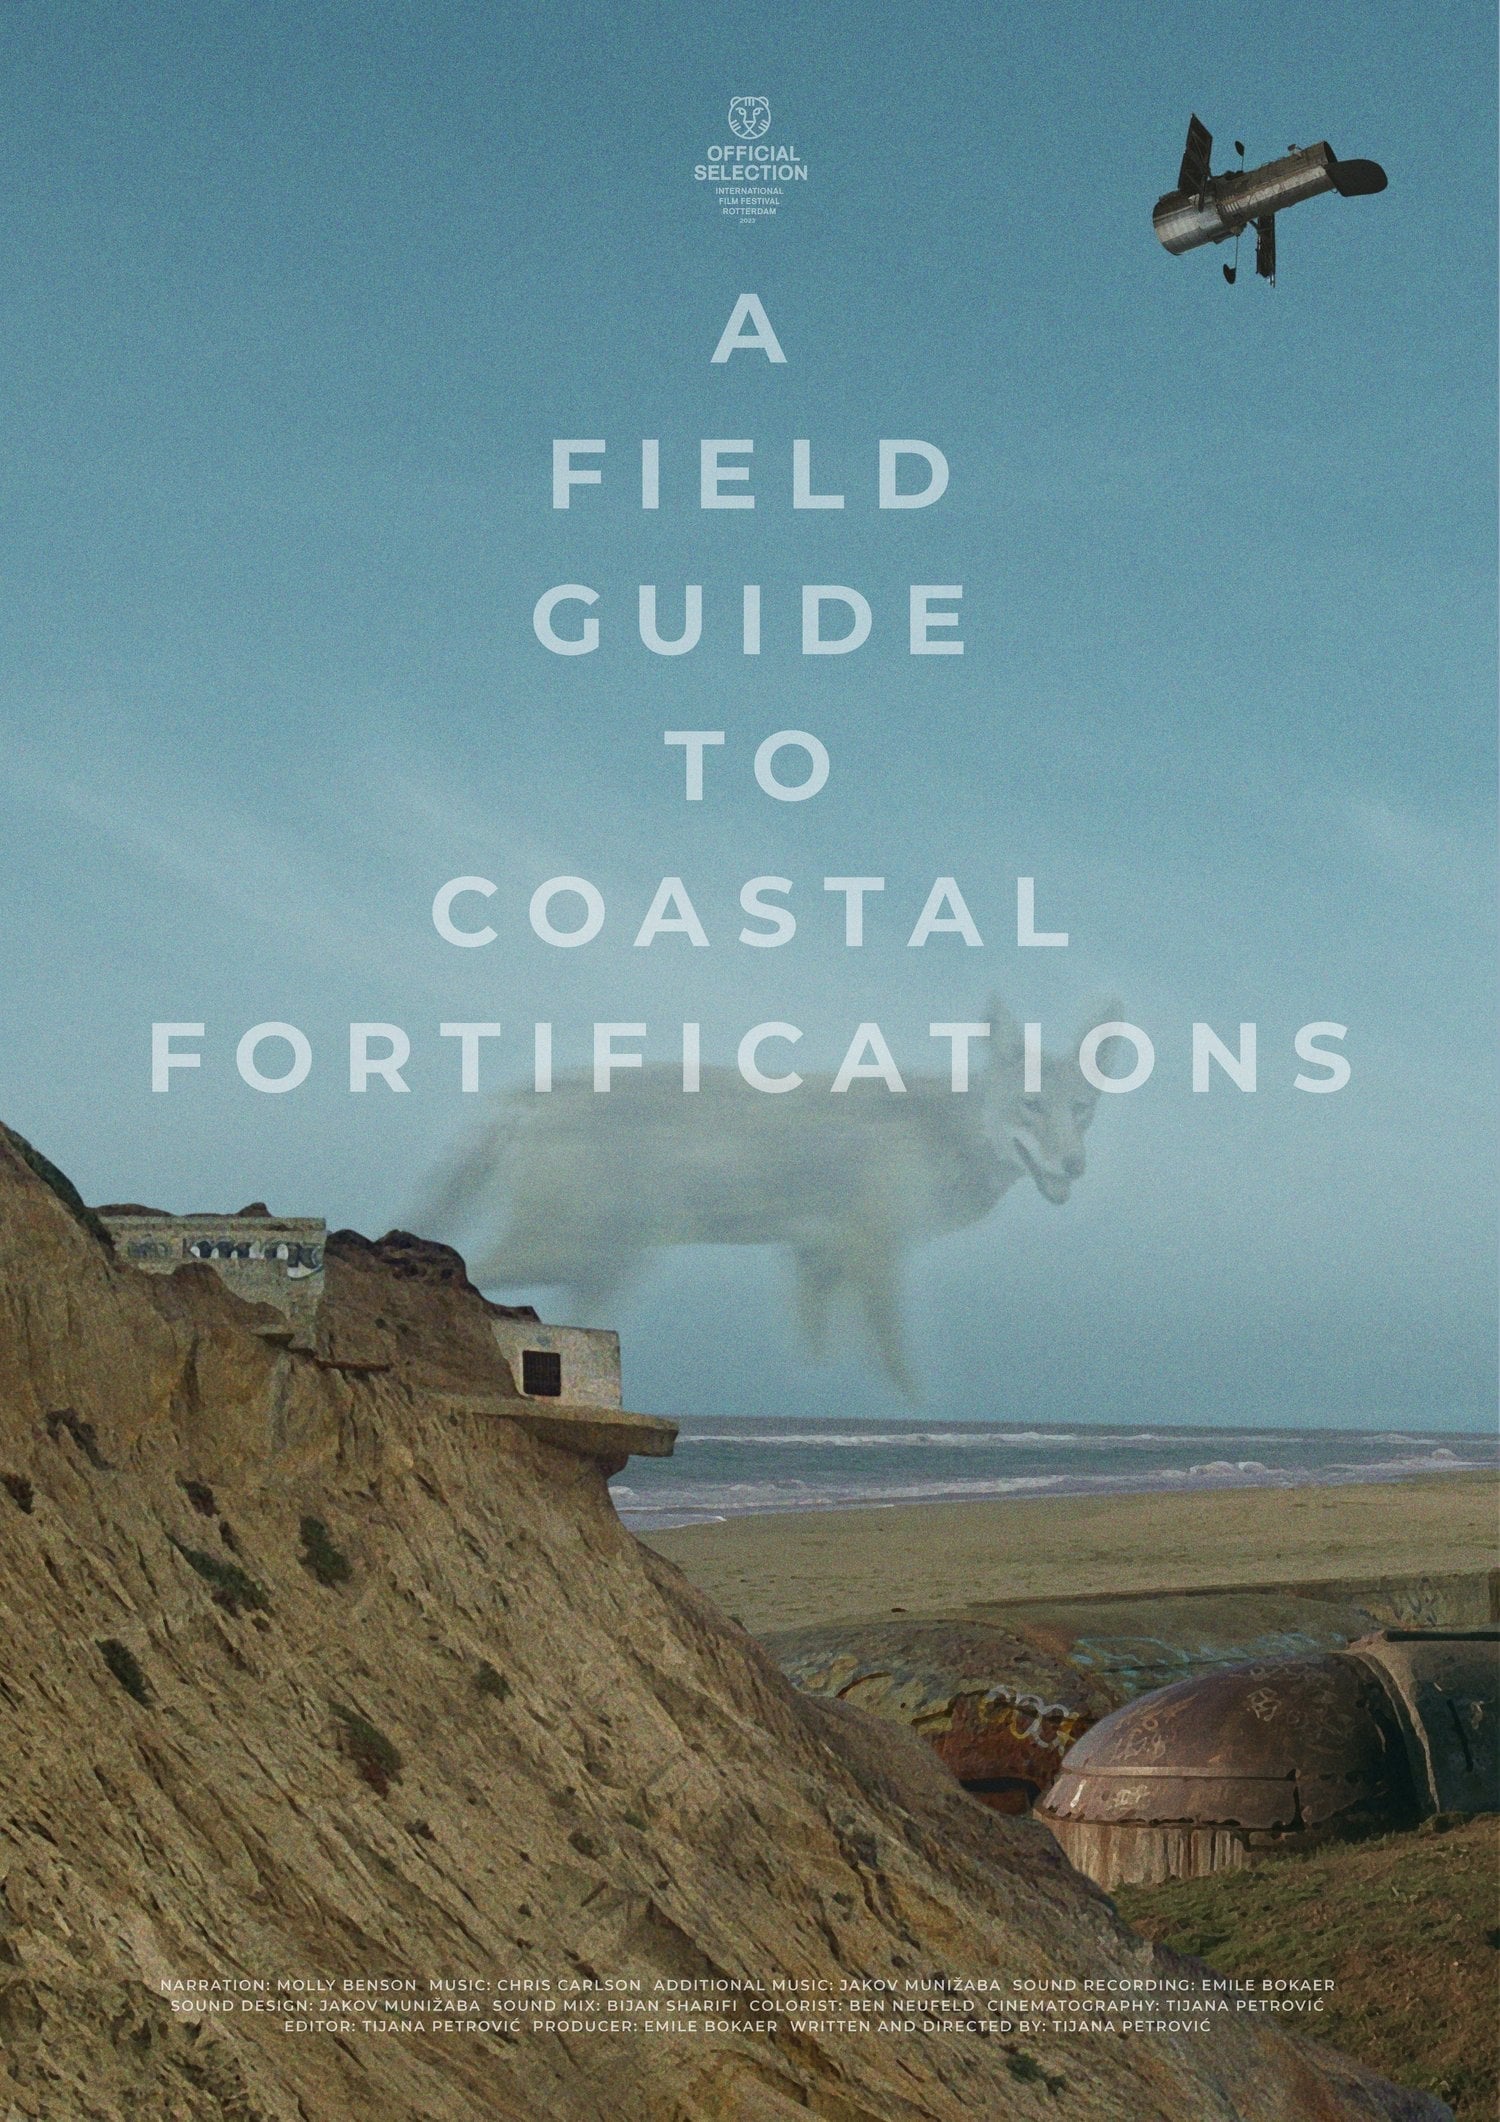 A Field Guide to Coastal Fortifications